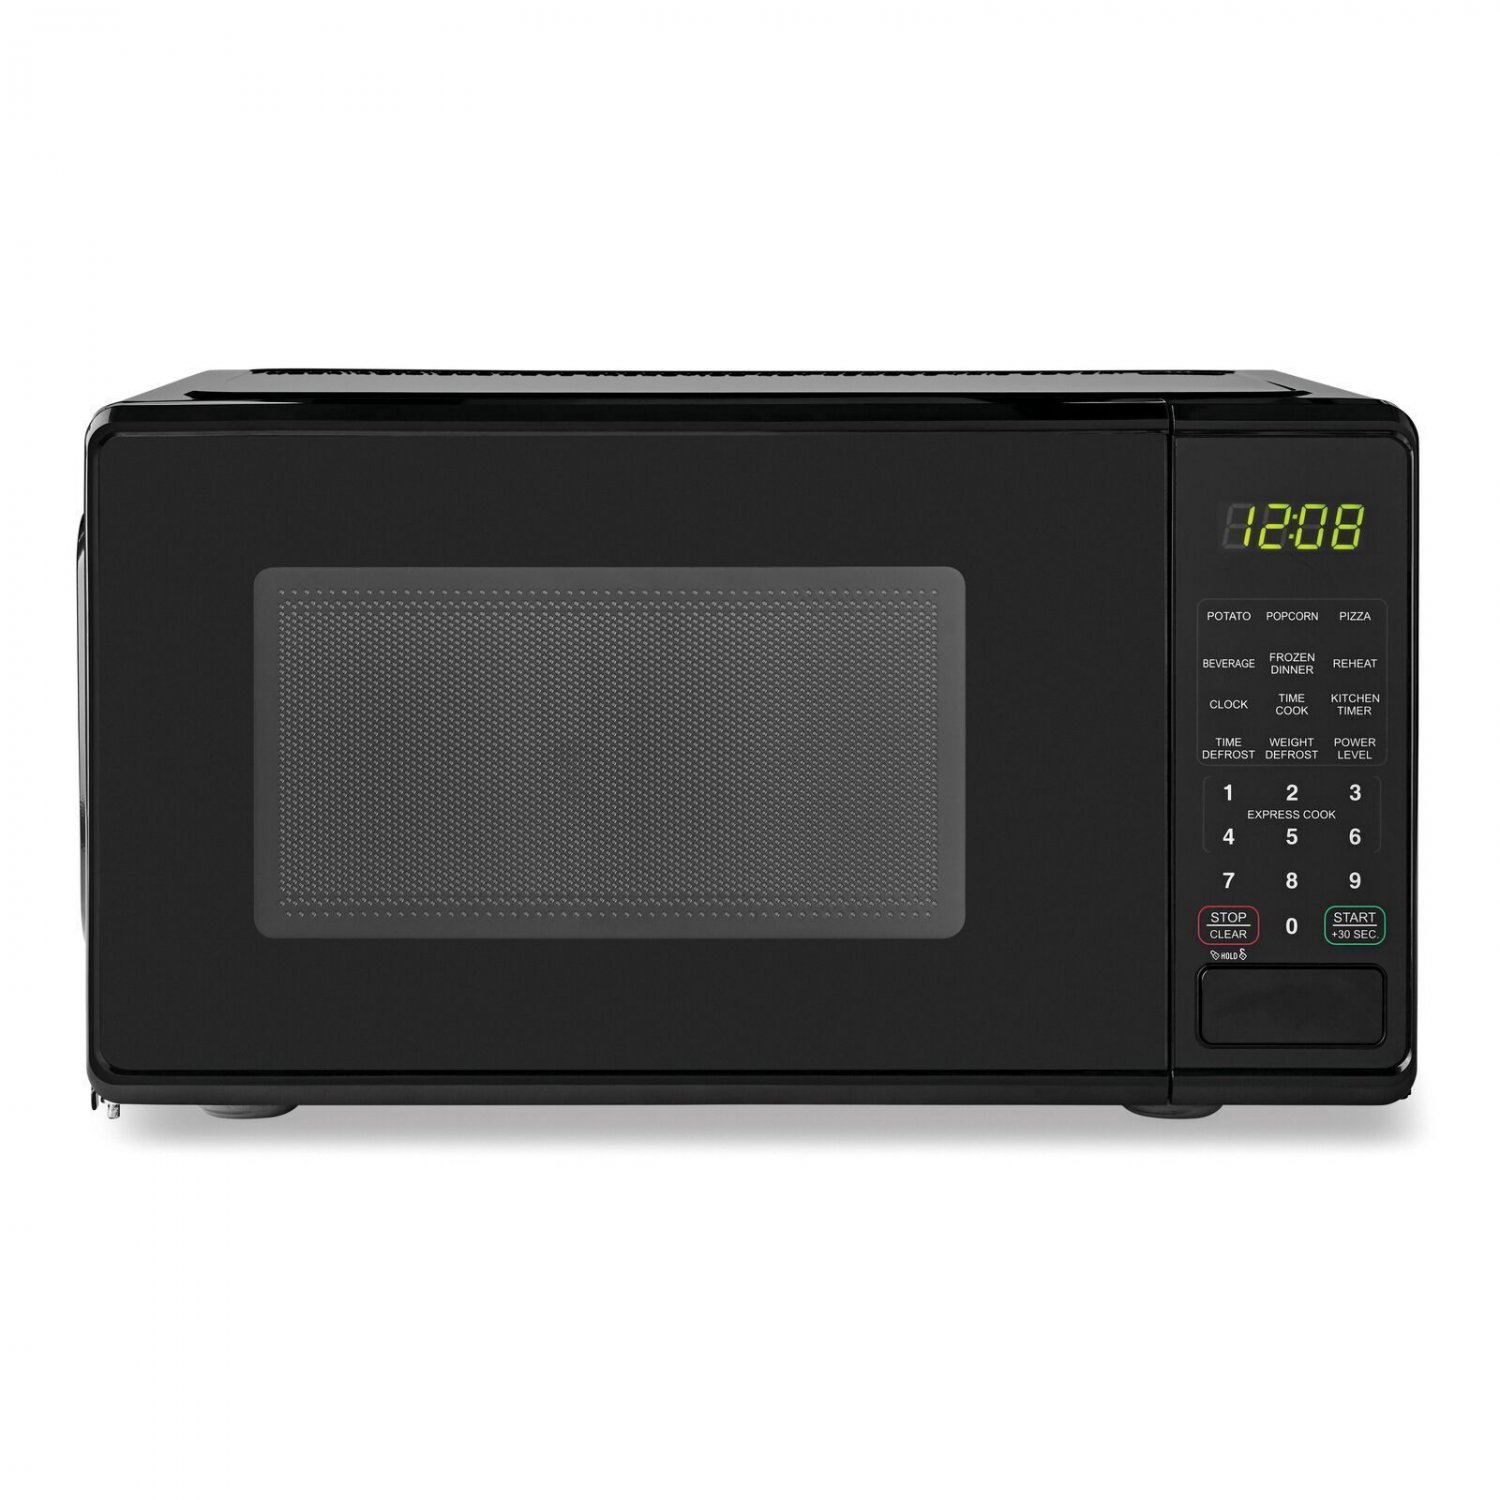 Mainstays 0.7 Cu ft Compact Countertop Microwave Oven